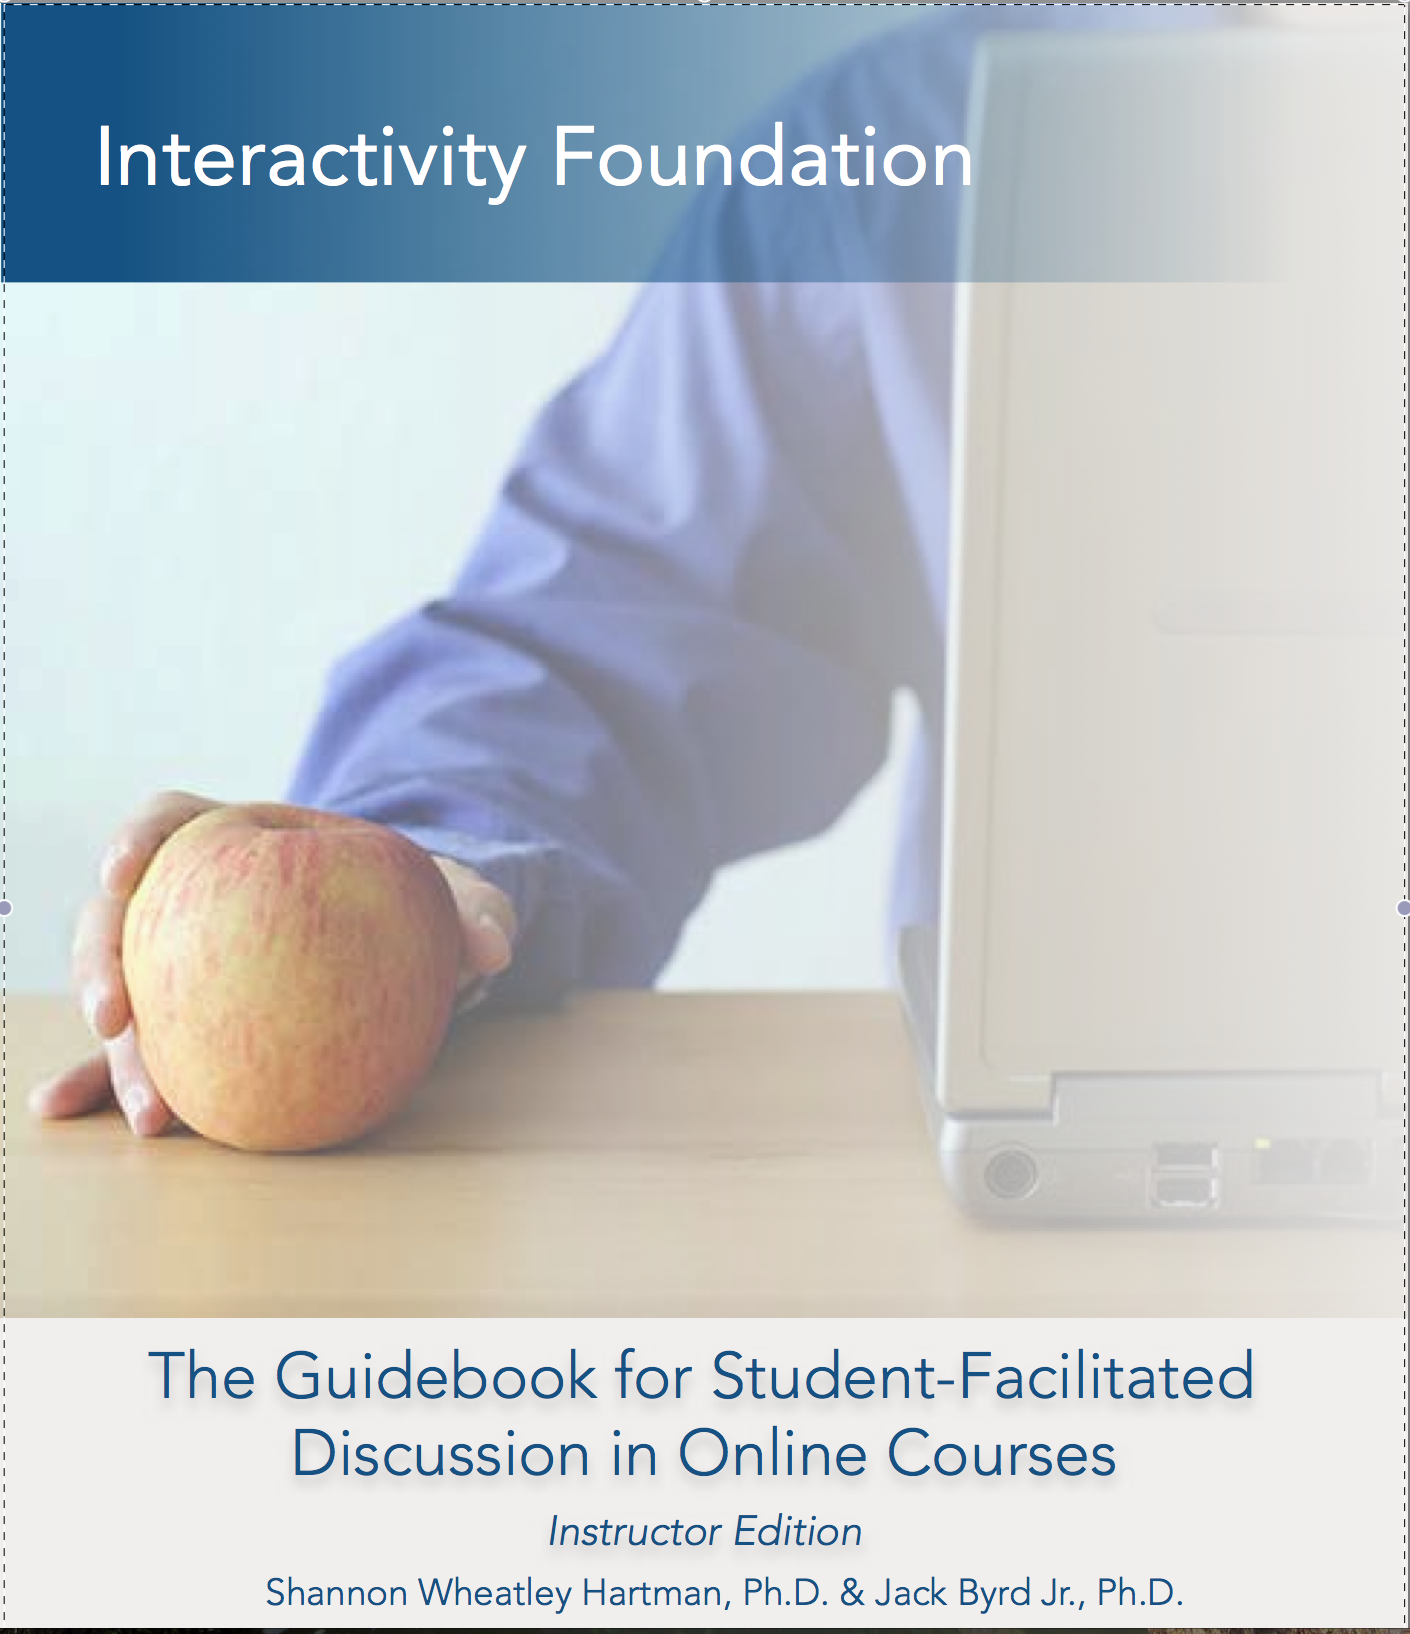 The Guidebook for Student-Facilitated Discussion in Online Courses is Now Available!